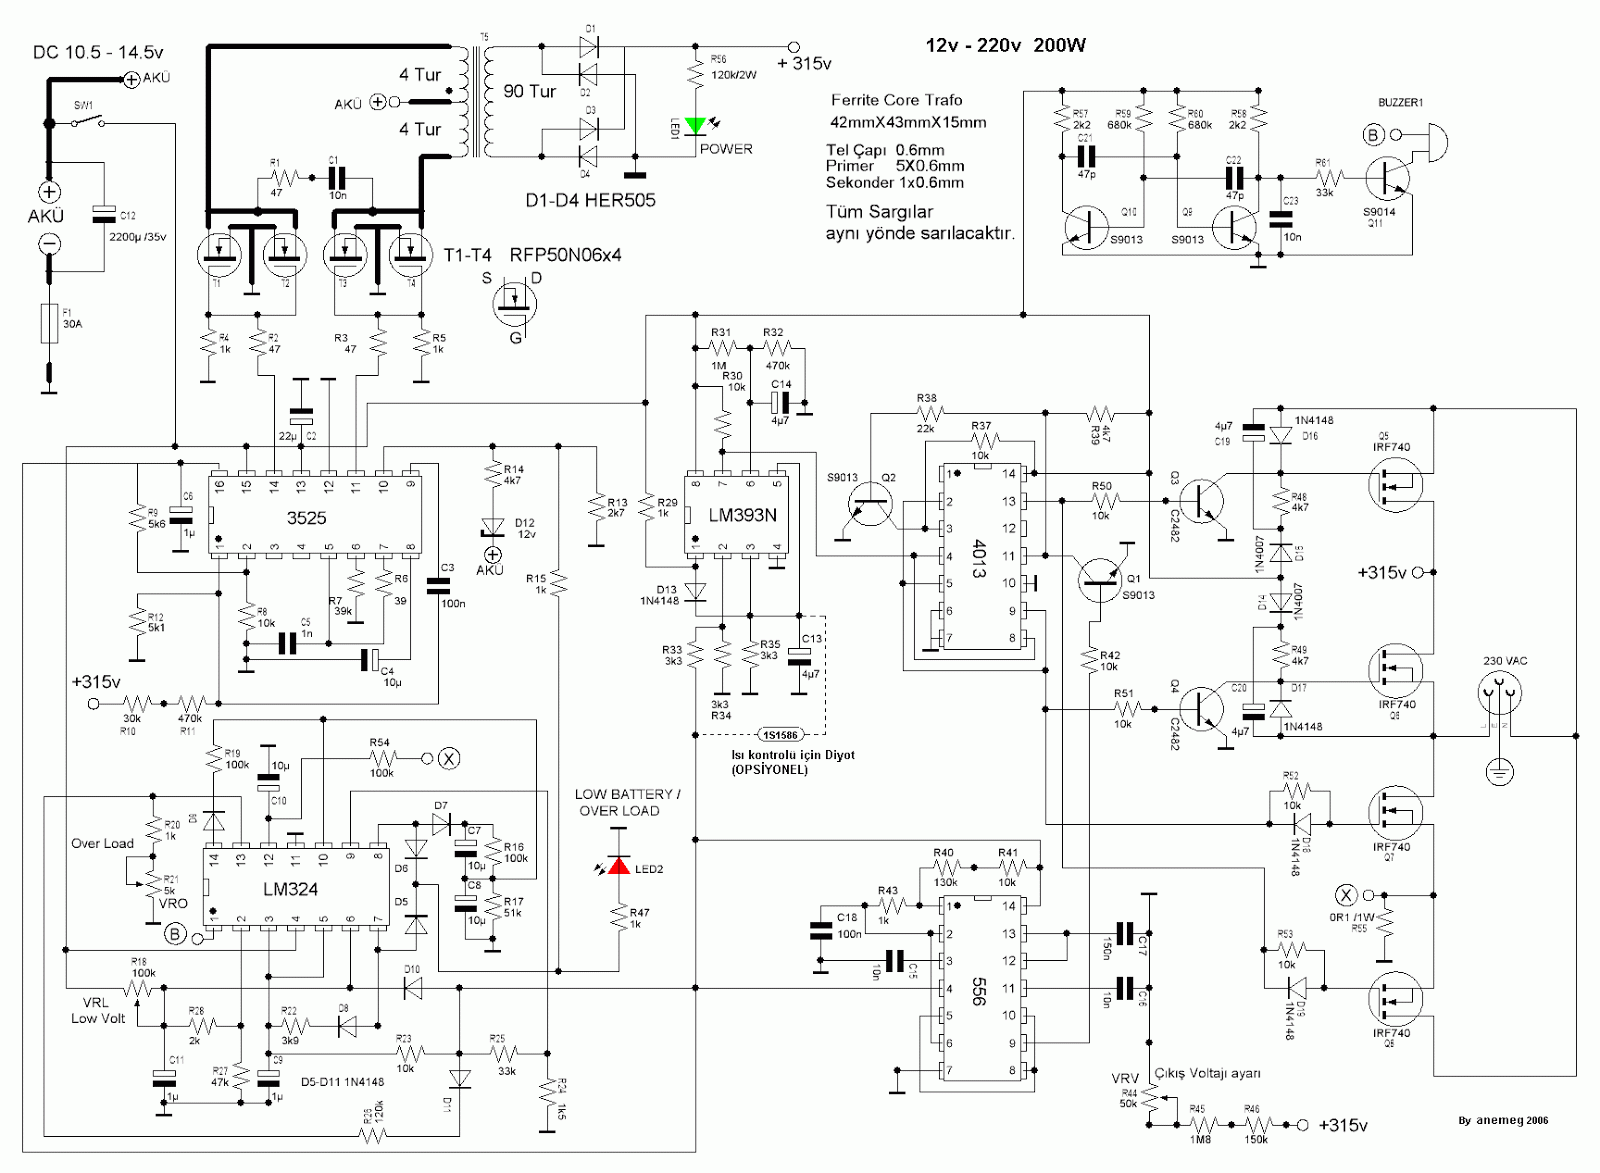 How to Make 200W Inverter 12V-220V Schematic - TRONICSpro  Electronic  circuit projects, Electronic schematics, 200w